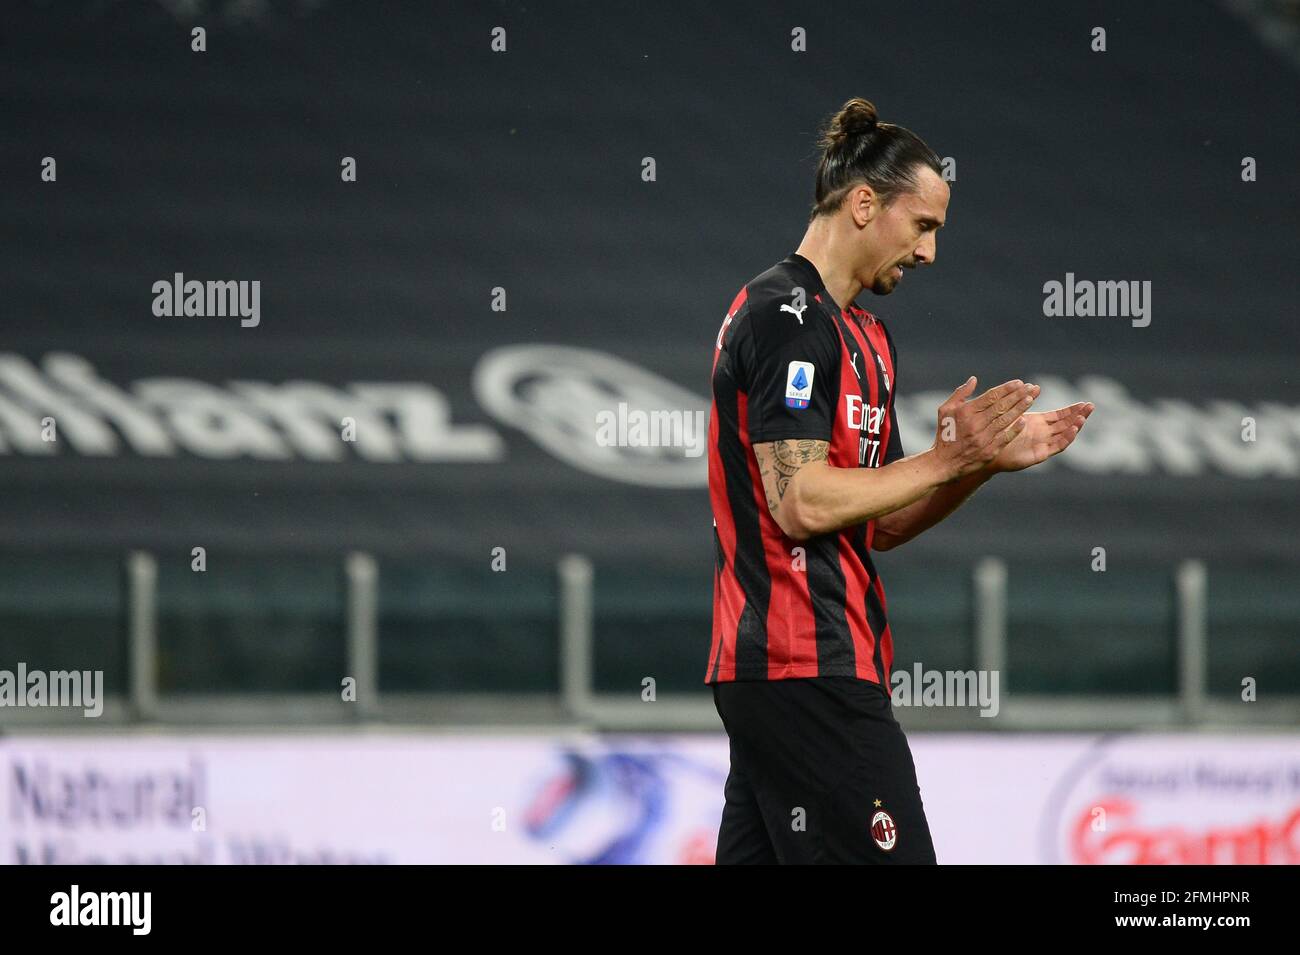 Turin, Italy. 09th May, 2021. Zlatan Ibrahimovic of AC Milan during the  Serie A football match between Juventus FC and AC Milan. Sporting stadiums  around Italy remain under strict restrictions due to